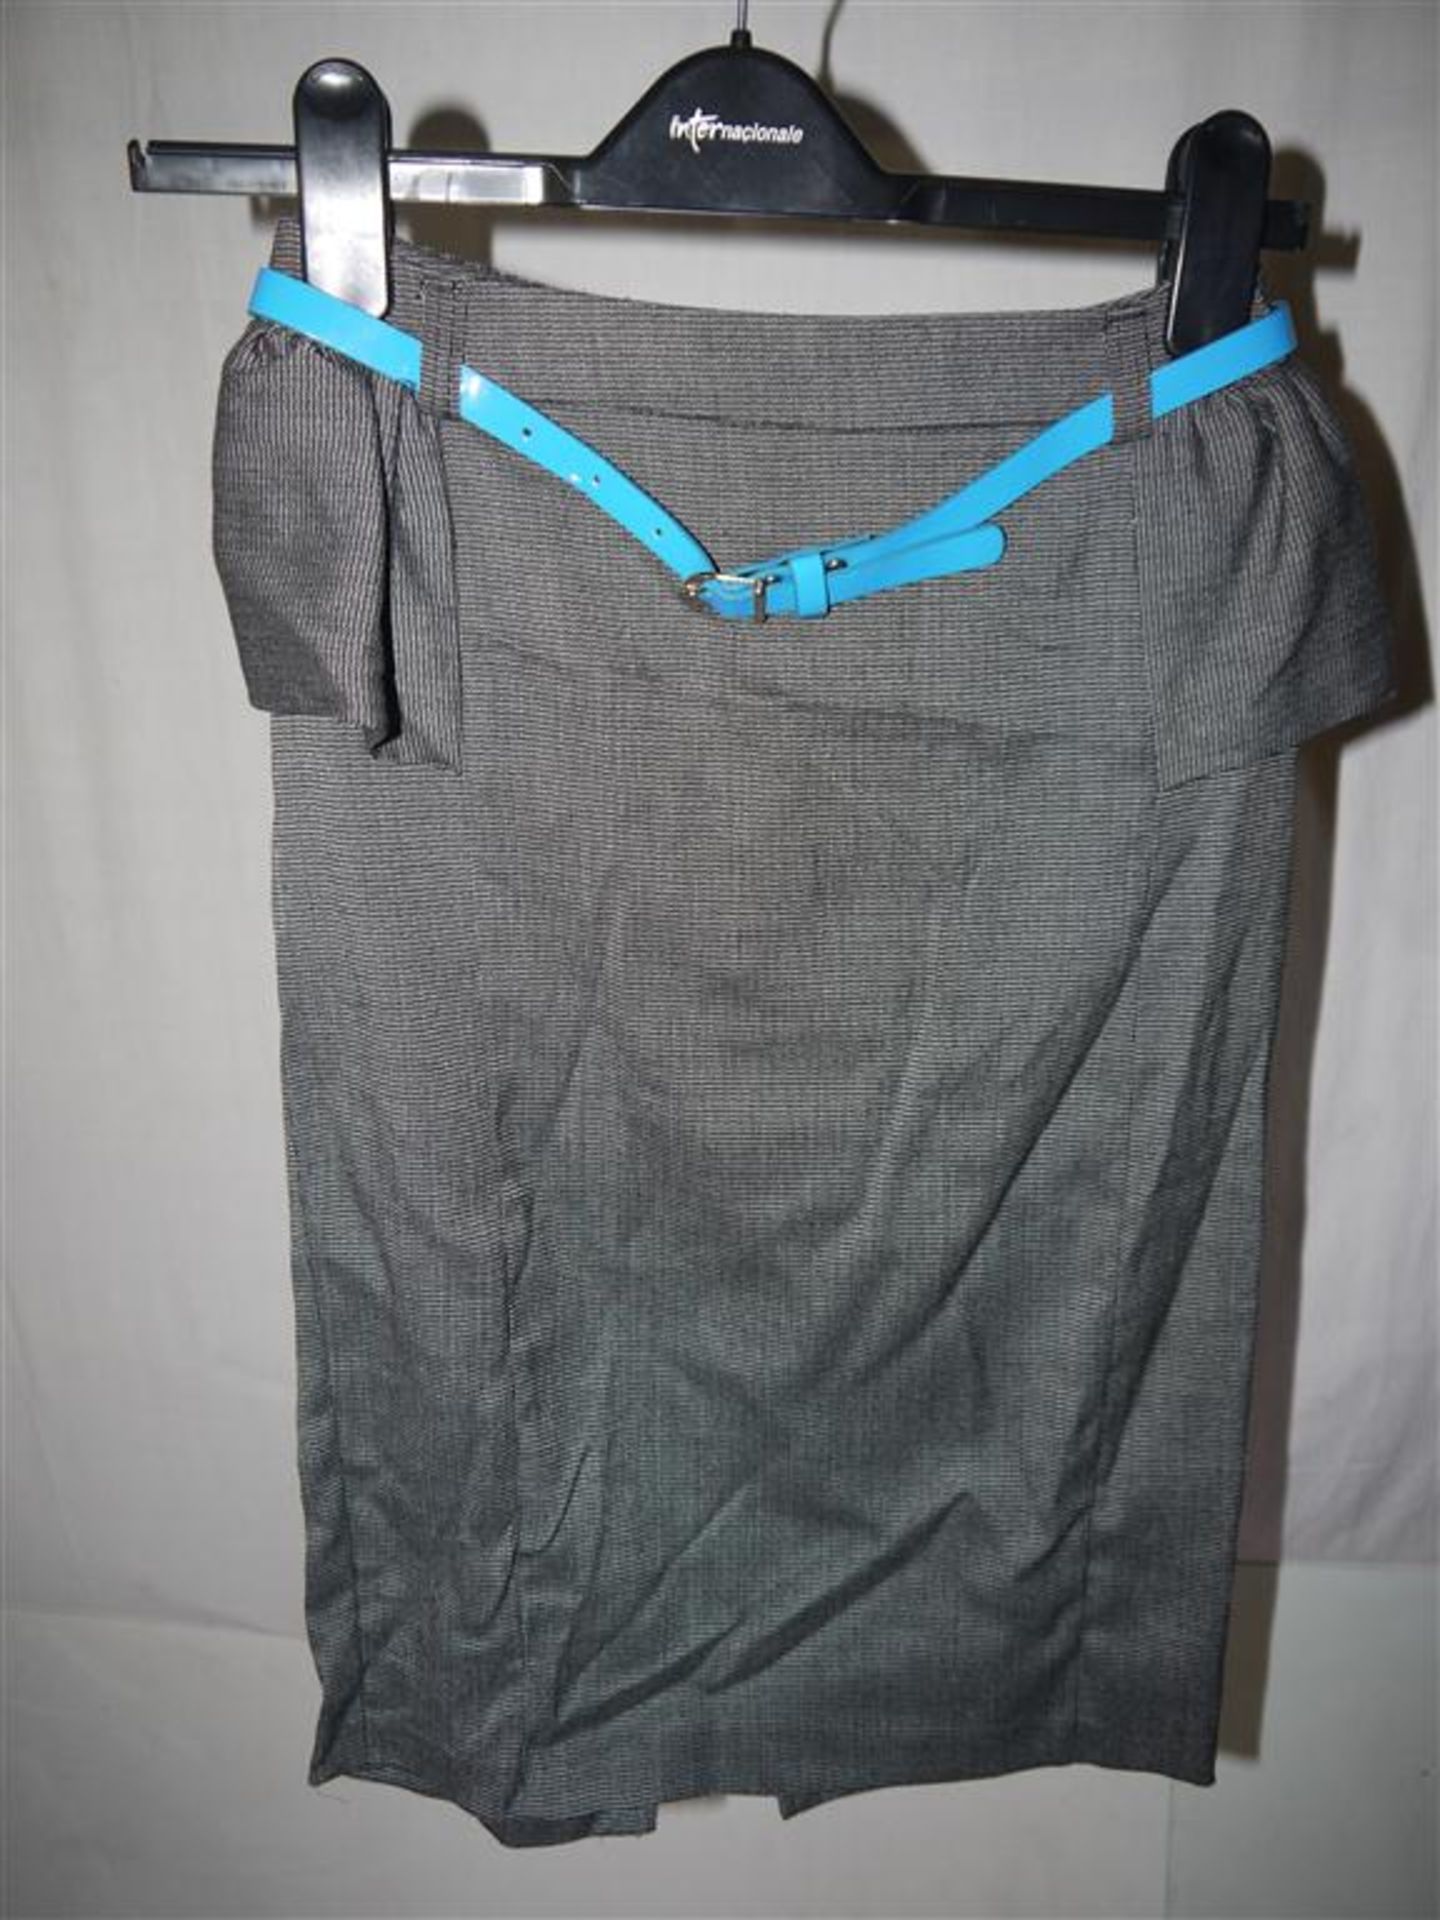 82 x Items Of Assorted Women's Clothing - Box407 - Shorts, Skirts, Pants, Tops & Swimwear - Sizes - Image 14 of 21